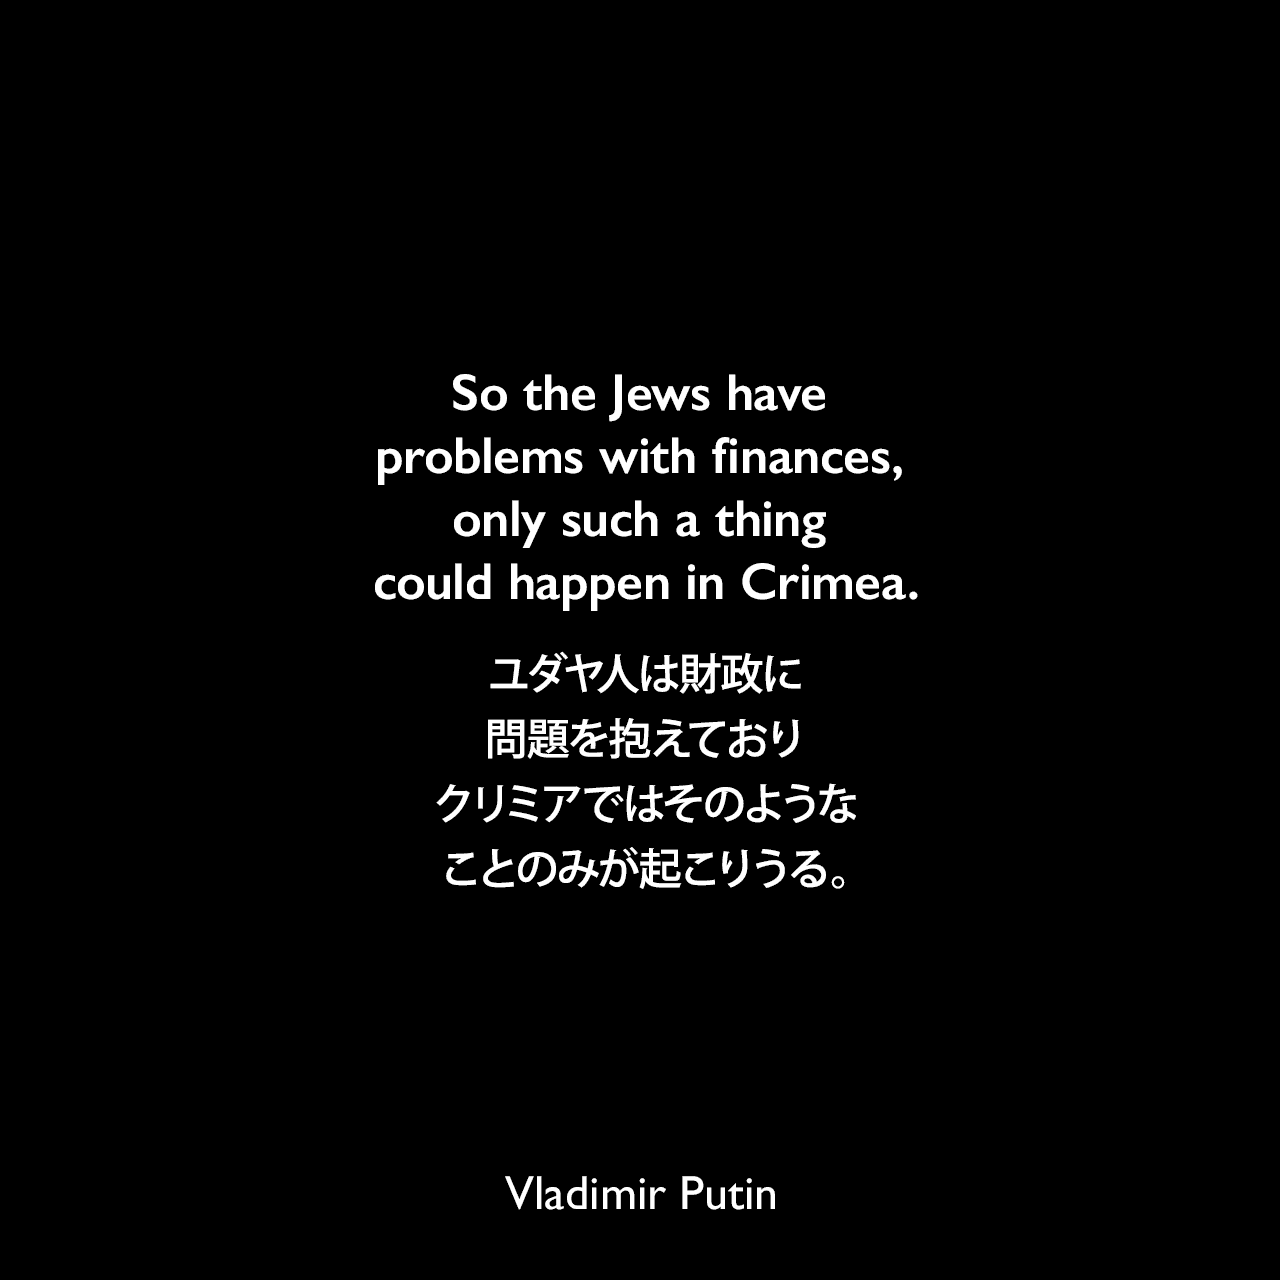 So the Jews have problems with finances, only such a thing could happen in Crimea.ユダヤ人は財政に問題を抱えており、クリミアではそのようなことのみが起こりうる。Vladimir Putin